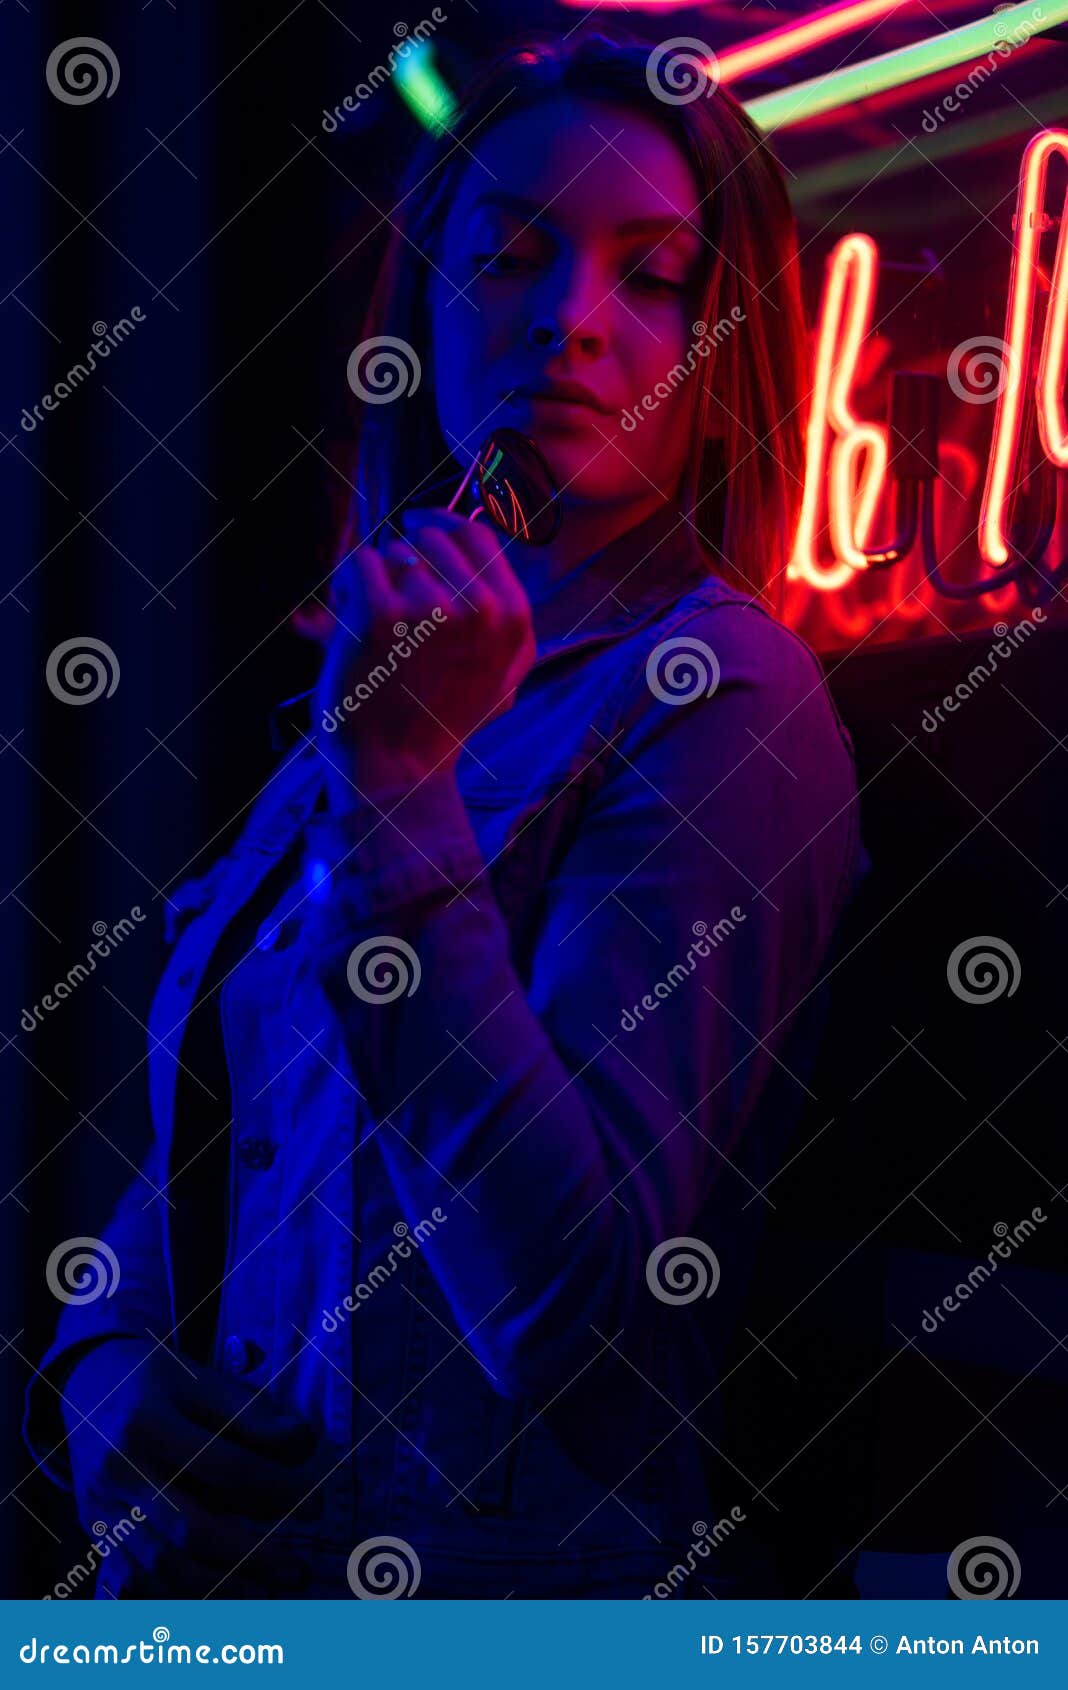 Creative Sexual Portrait of a Girl in Neon Lighting with Glasses, Night Party, Dancing, Game Business, Striptease Stock Photo pic